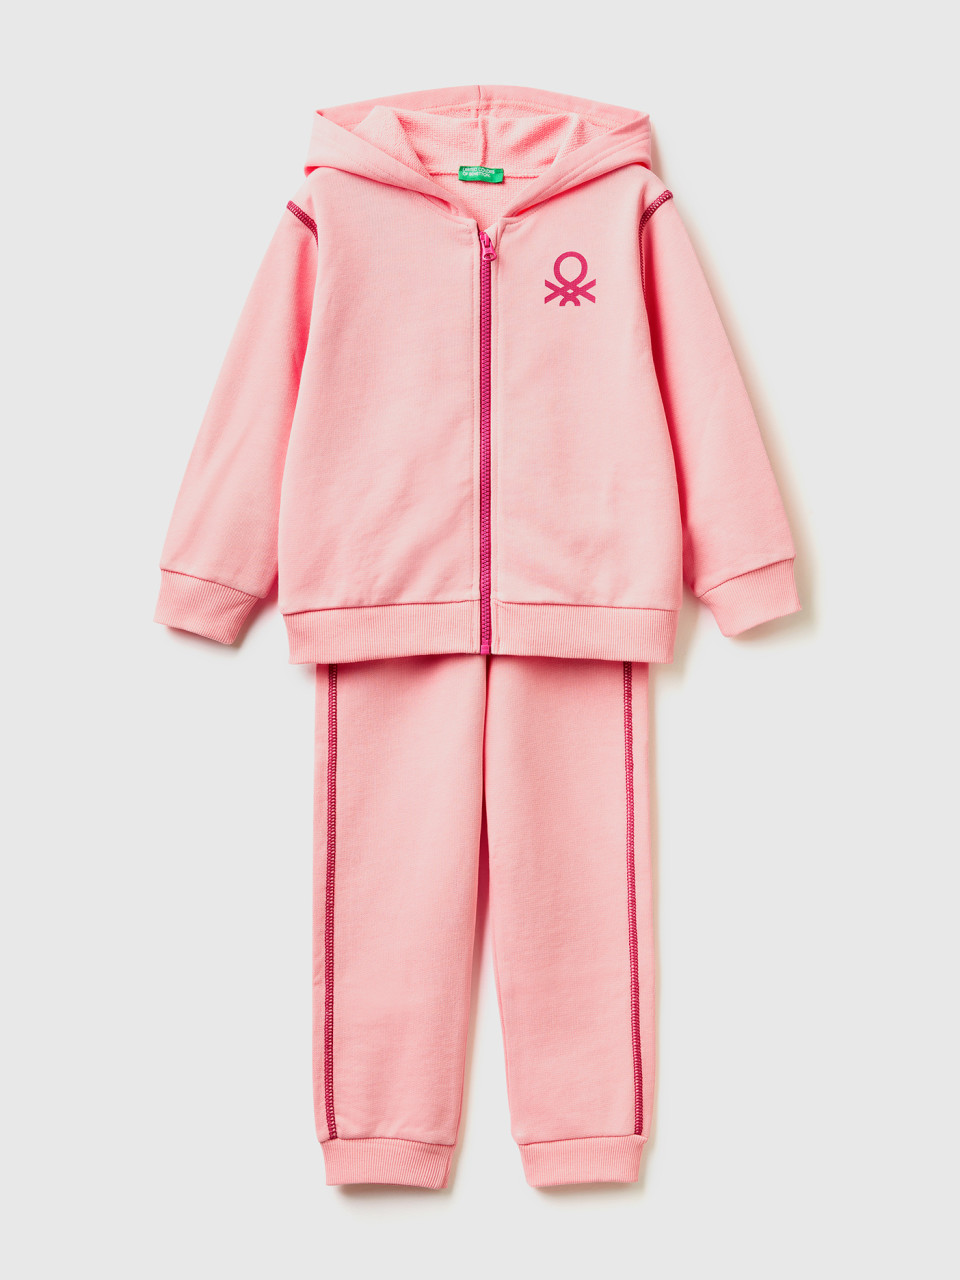 Benetton, Sweat Tracksuit In 100% Cotton, Pink, Kids